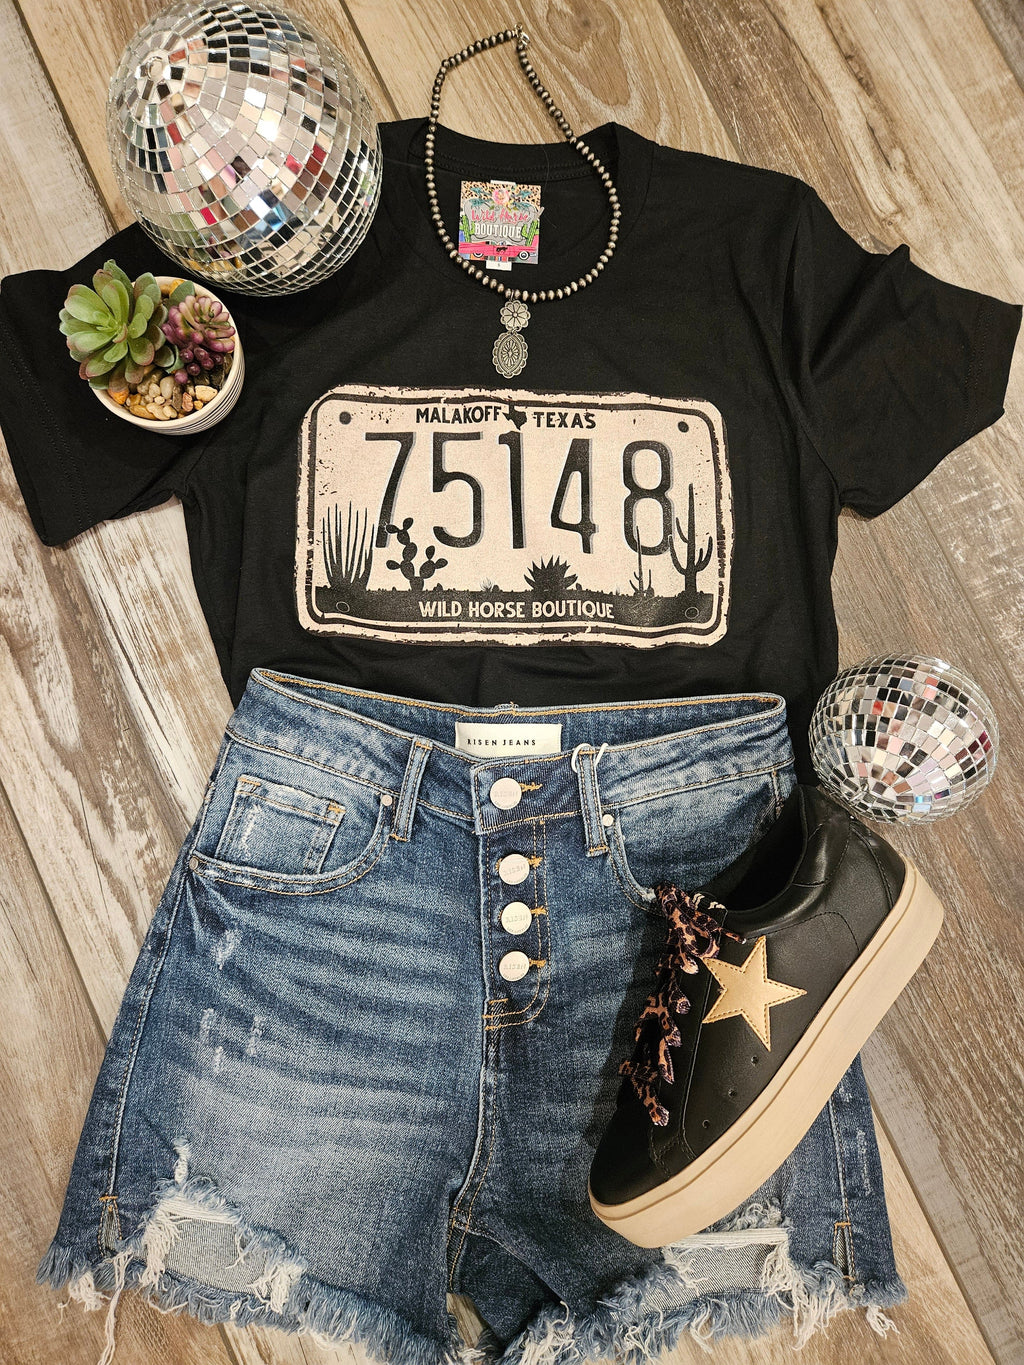 Wild Horse Boutique Apparel & Accessories The 75148 tee